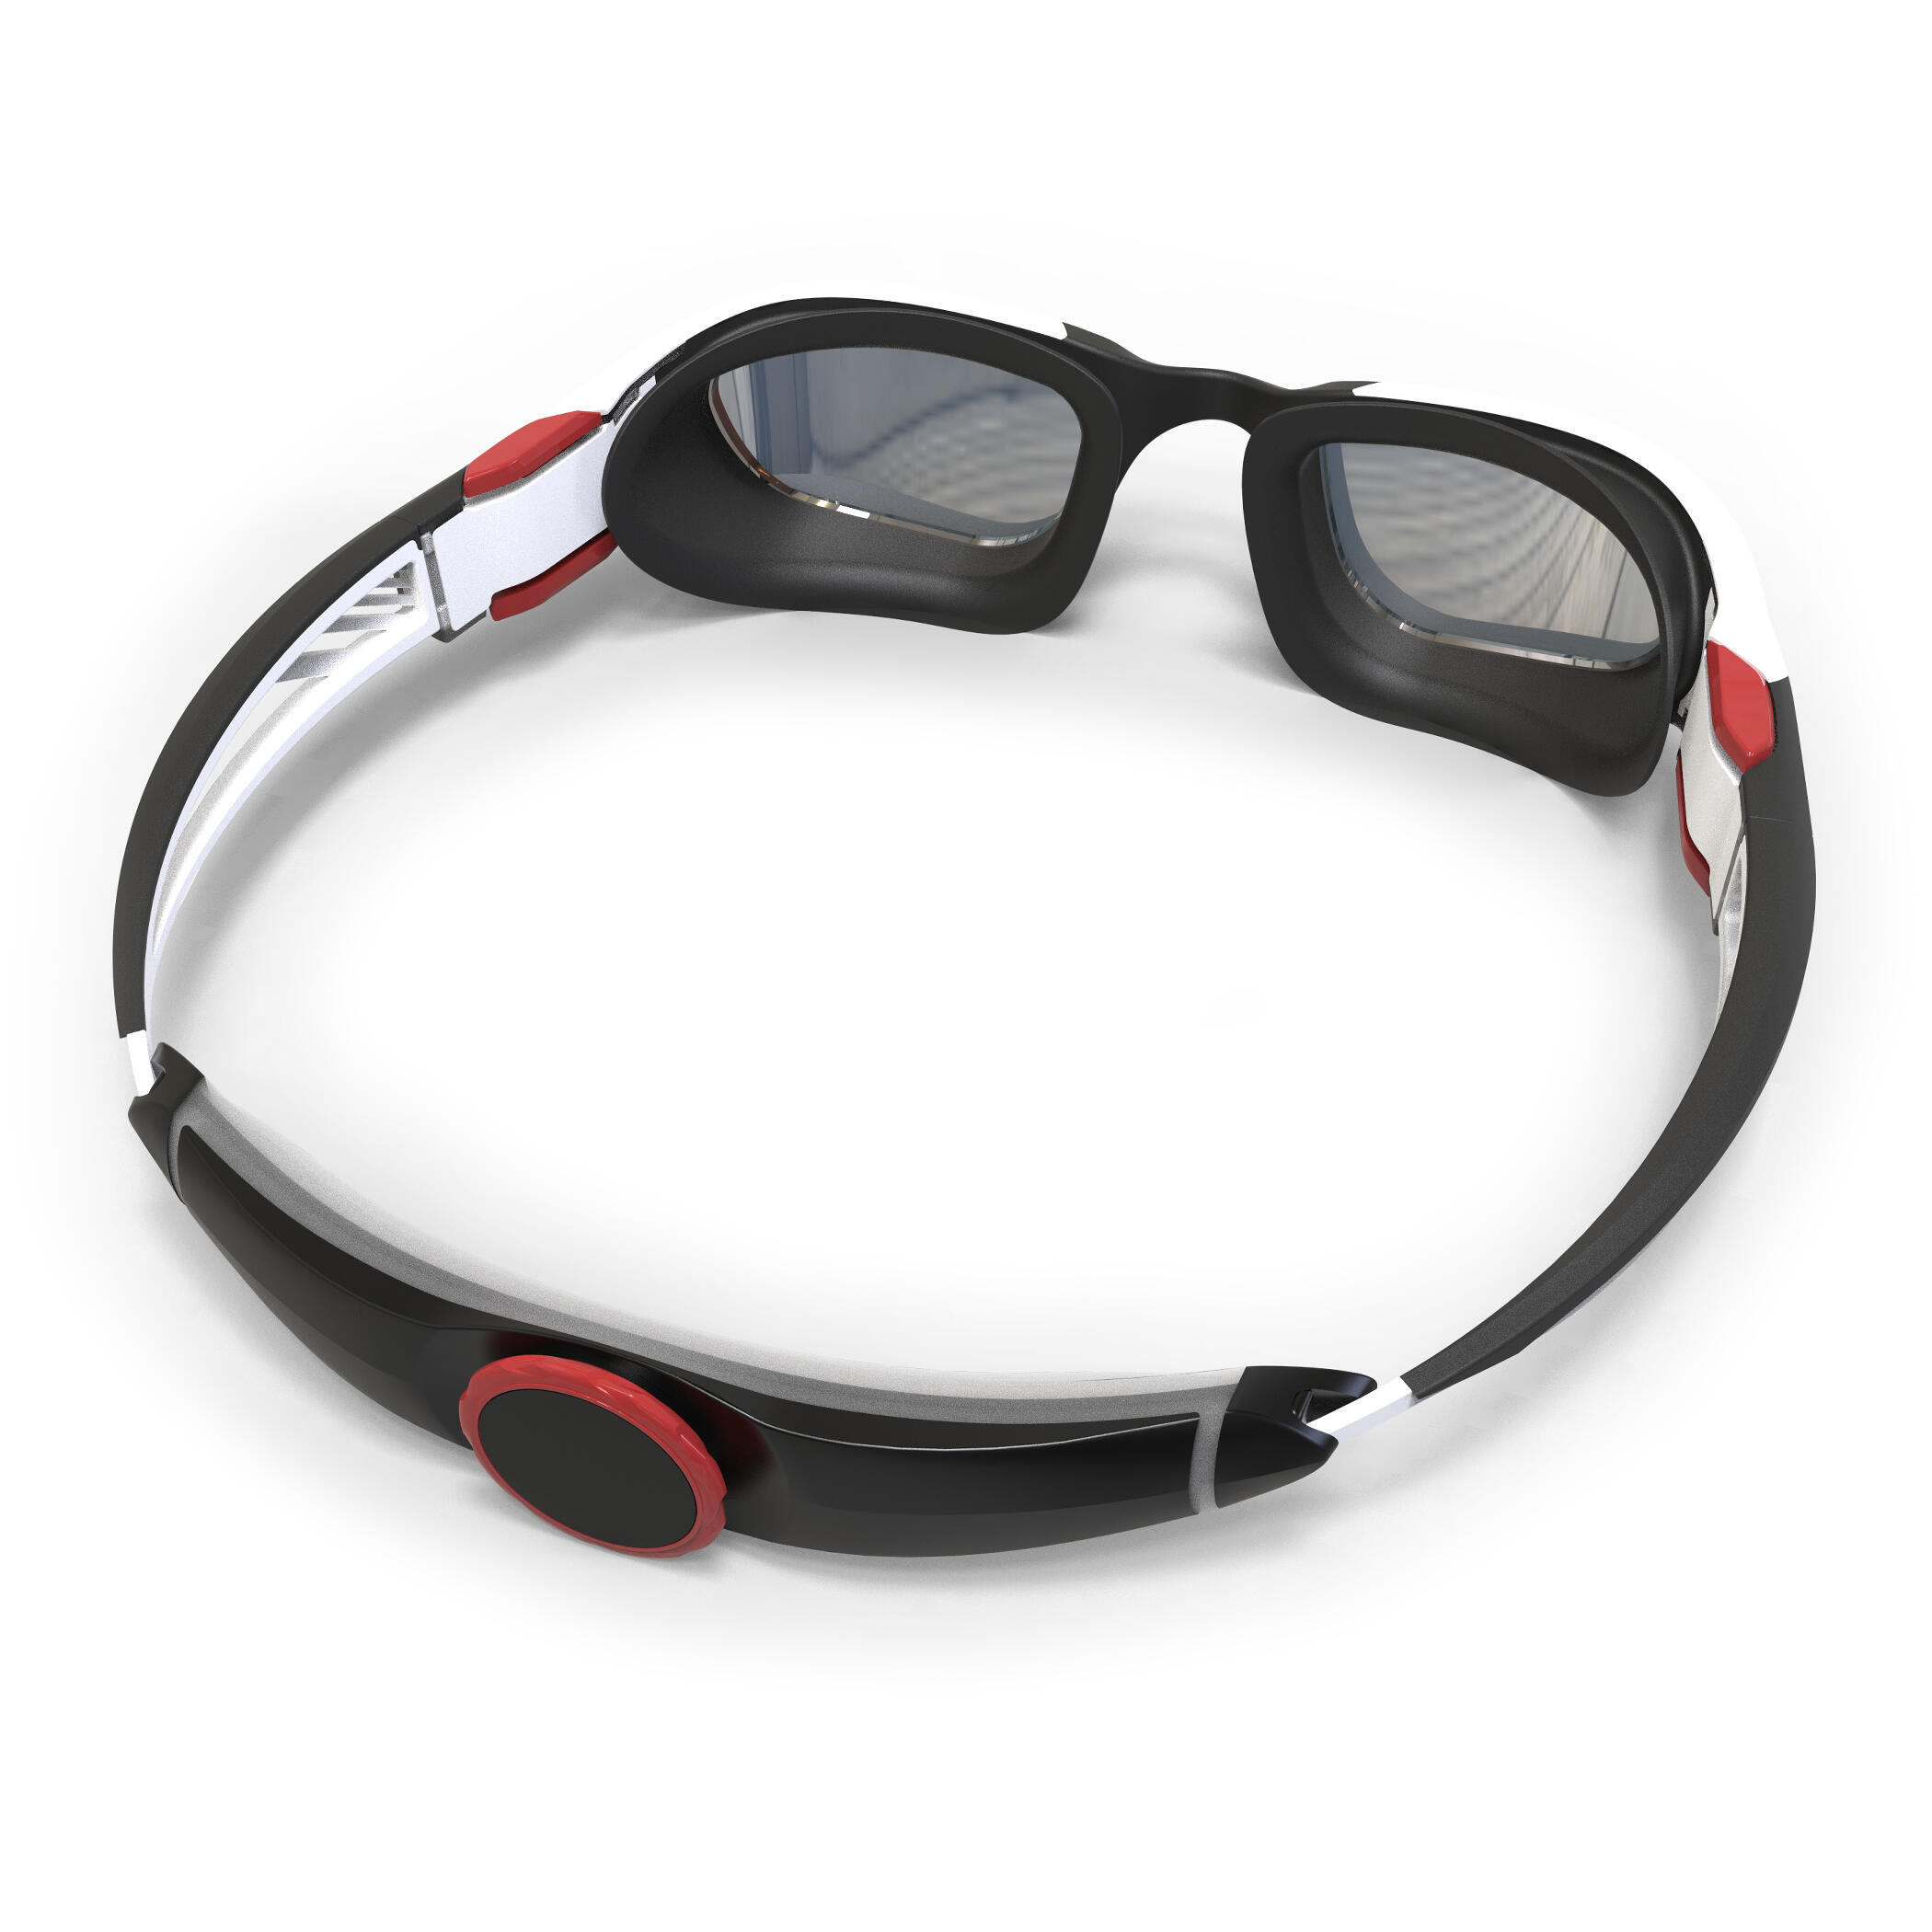 TURN swimming goggles - Mirrored lenses - Single size - Black white red 3/10